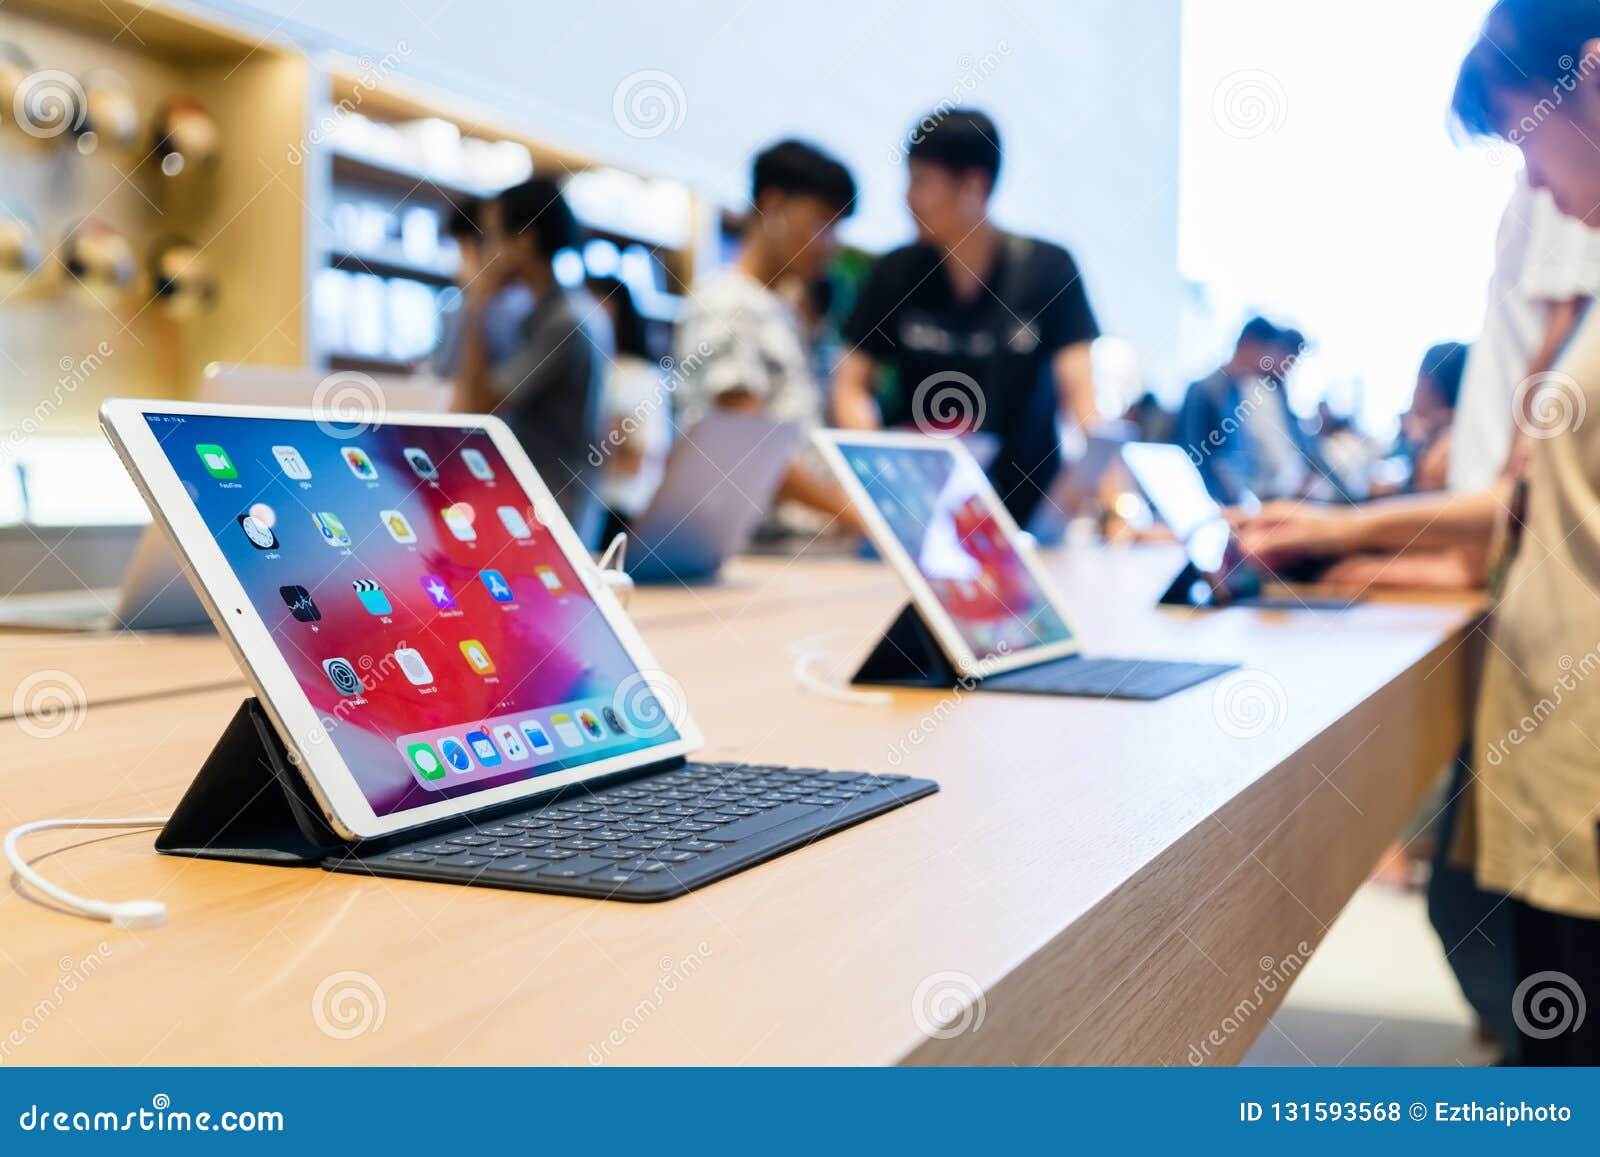 Apple Store New Product Ipad Pro With Smart Keyboard Display At Apple